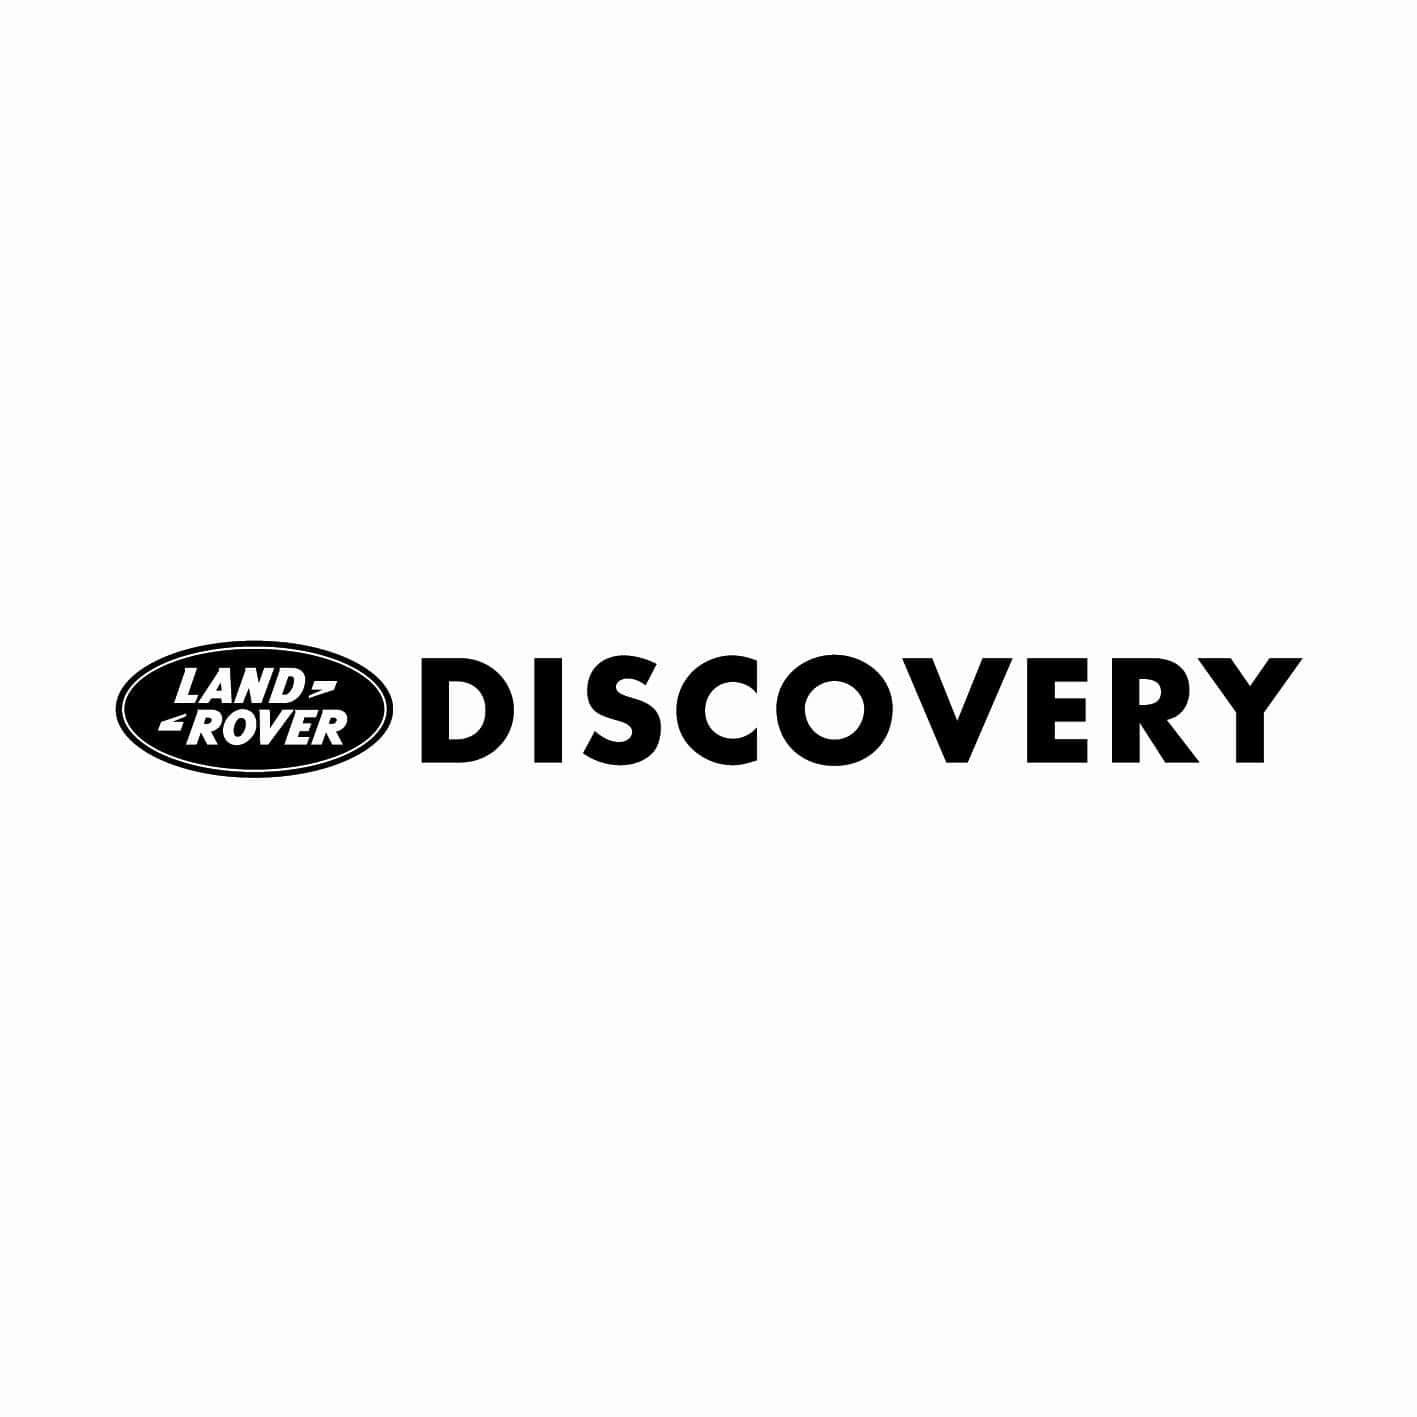 land-rover-ref6-discovery-stickers-sticker-autocollant-4x4-tuning-audio-4x4-tout-terrain-car-auto-moto-camion-competition-deco-rallye-racing-min